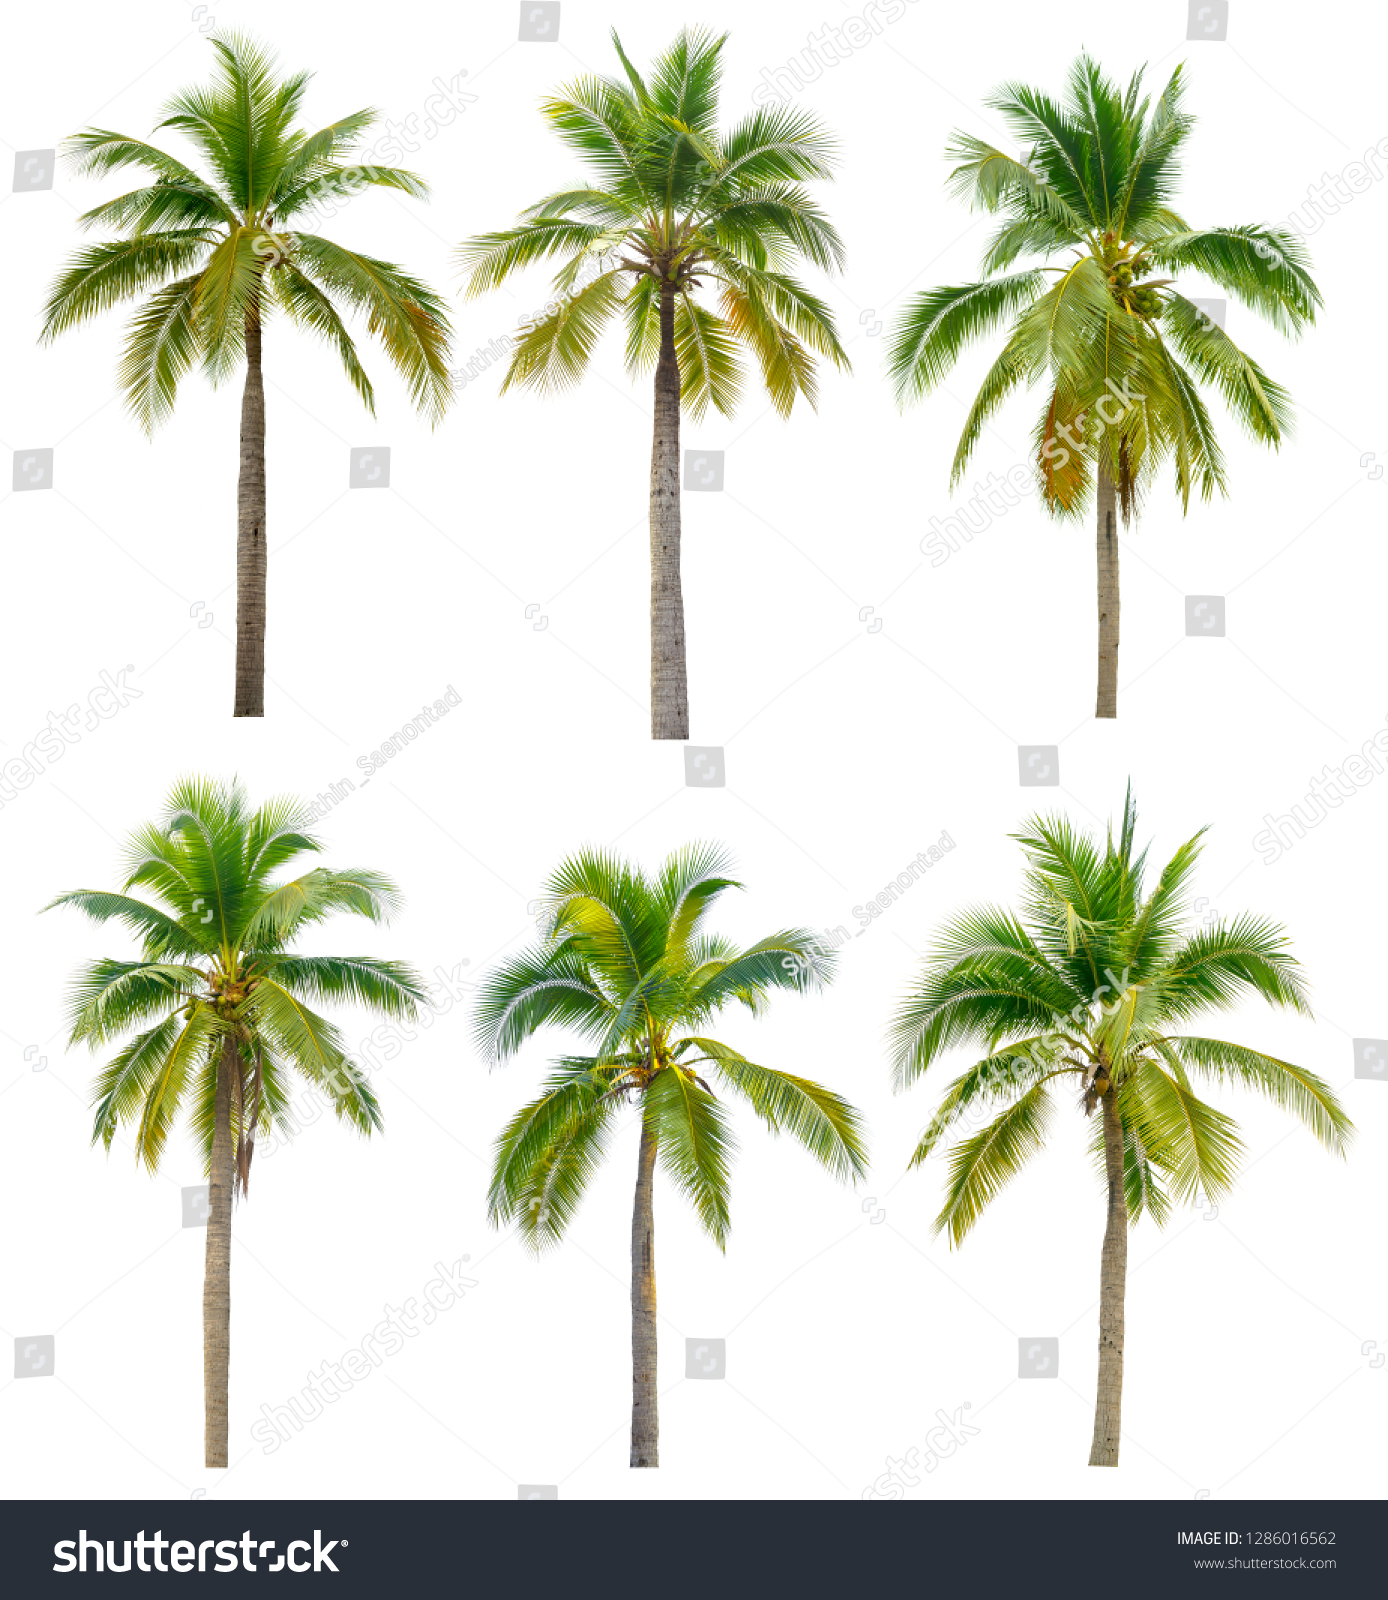 Coconut Palm Tree Isolated On White Stock Photo 1286016562 | Shutterstock